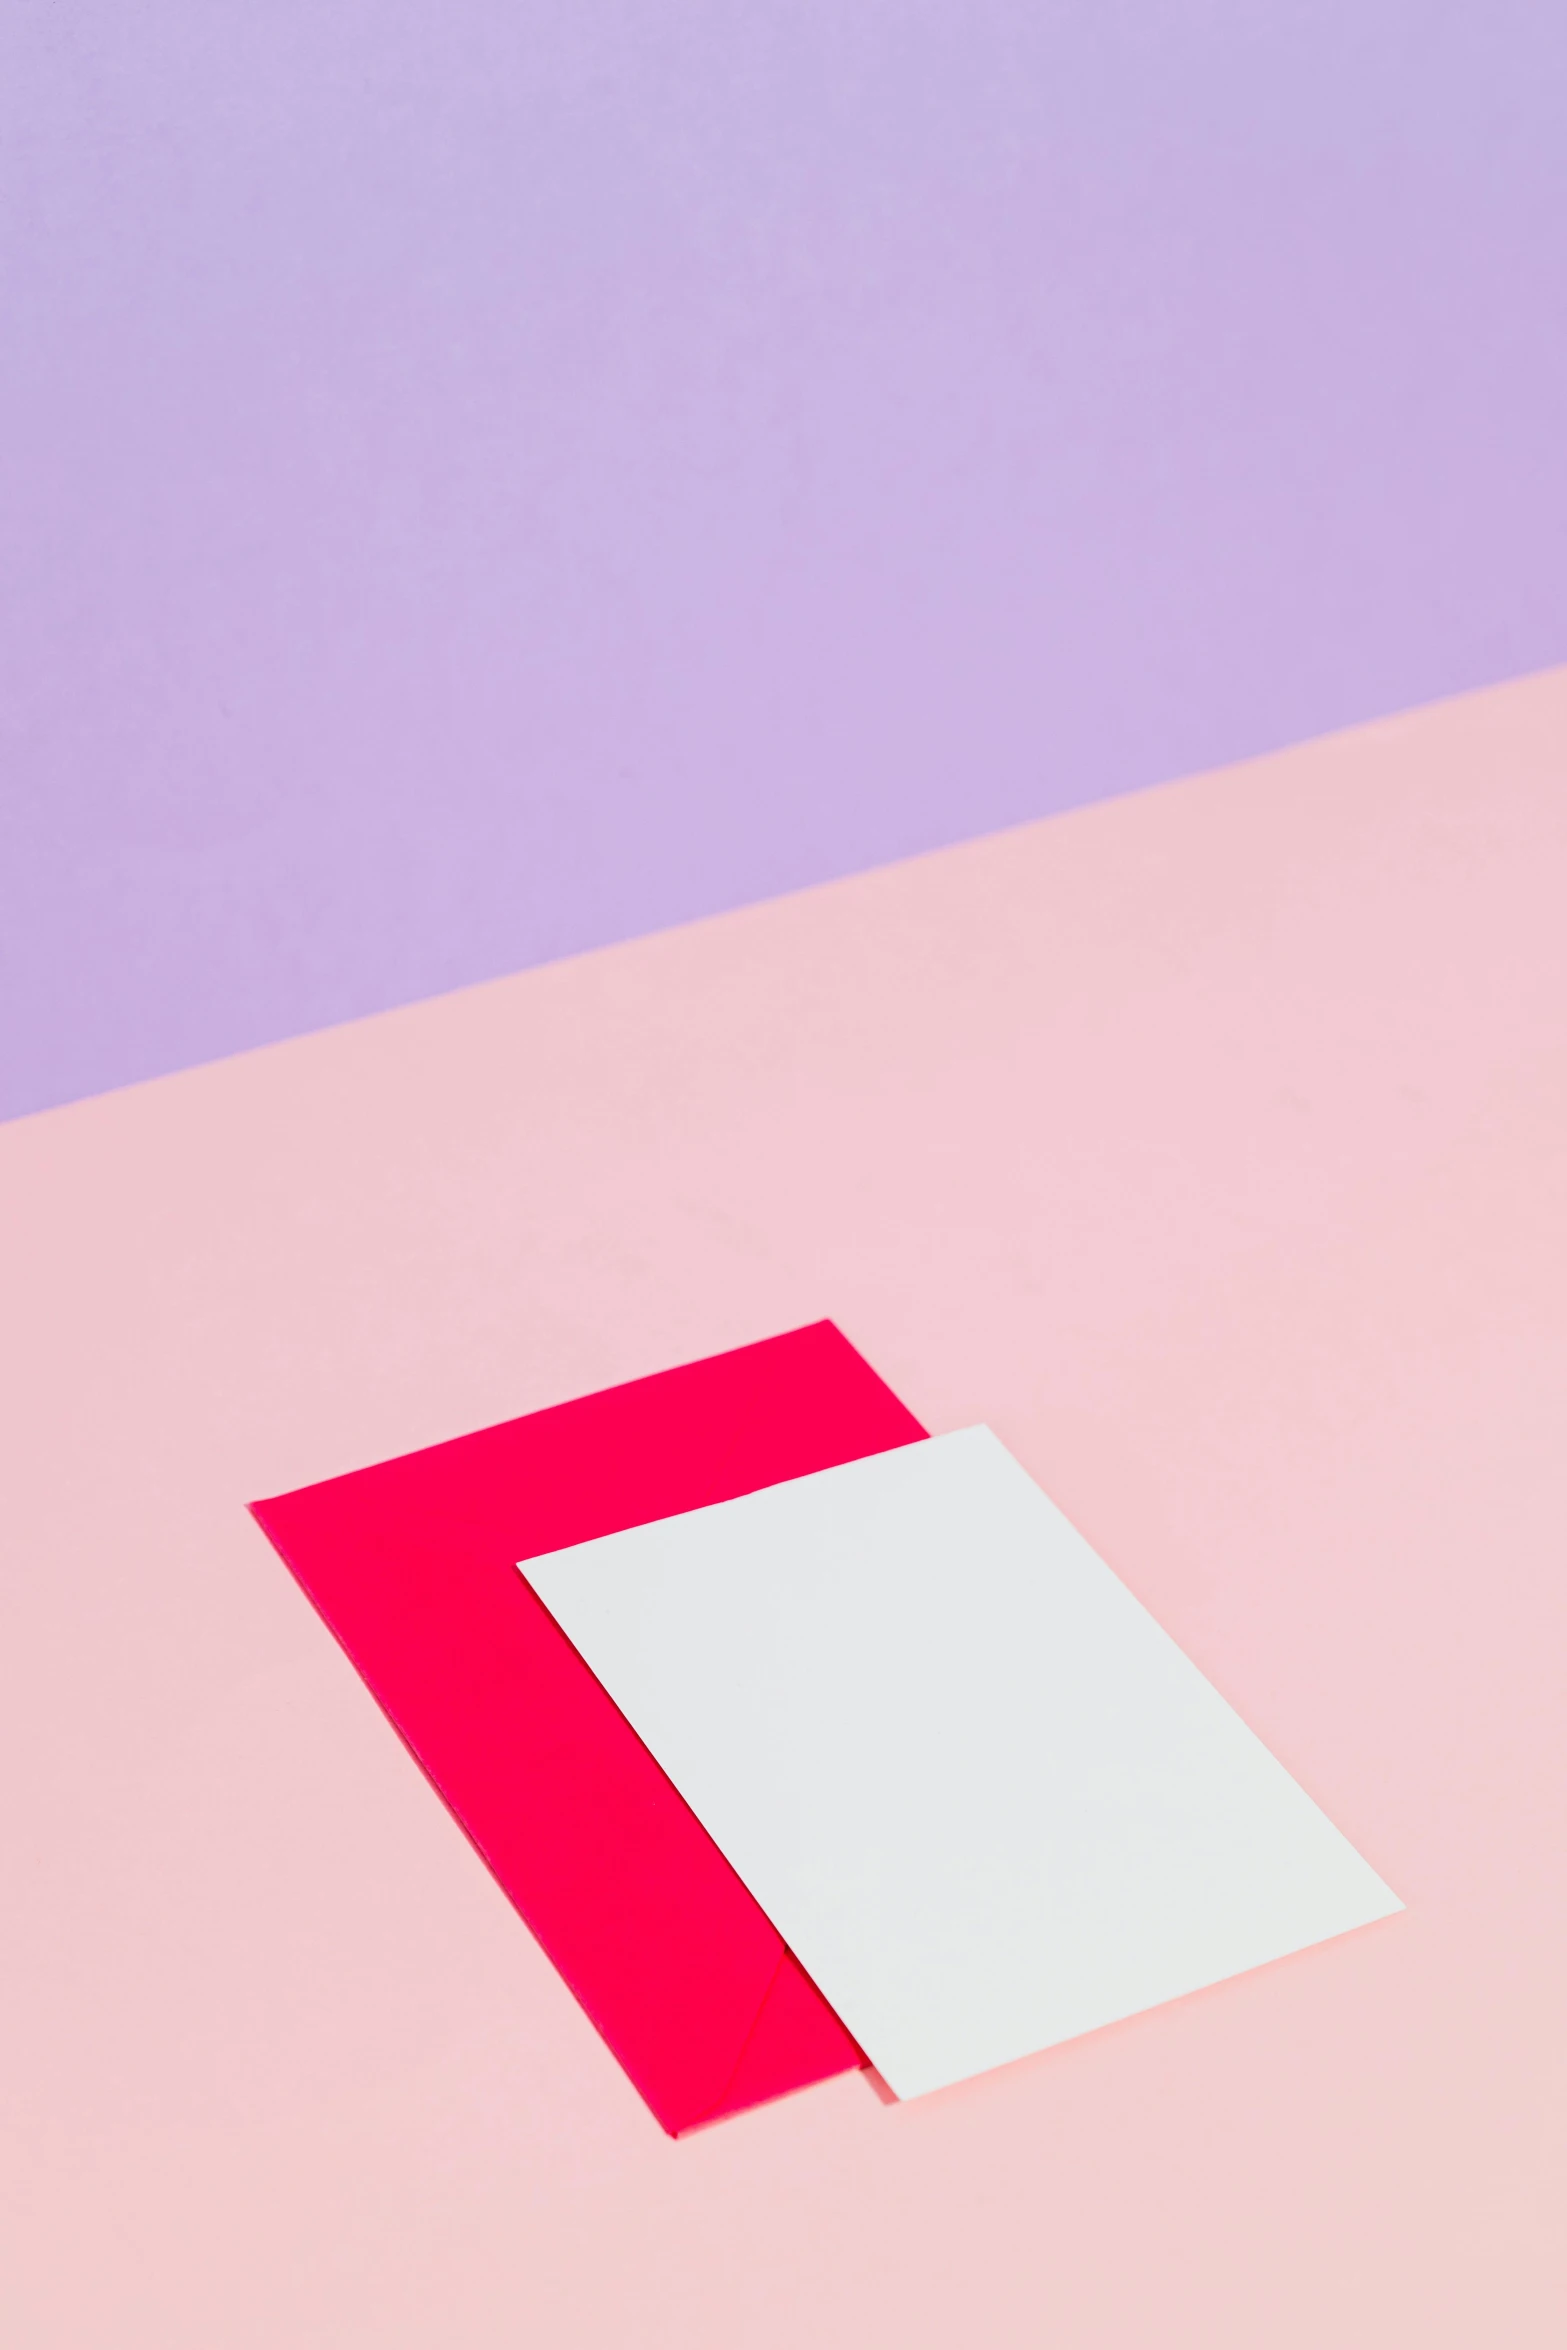 a piece of paper sitting on top of a table, inspired by Josef Albers, trending on unsplash, color field, pink and purple, graphic detail, vertical composition, pink and red color style